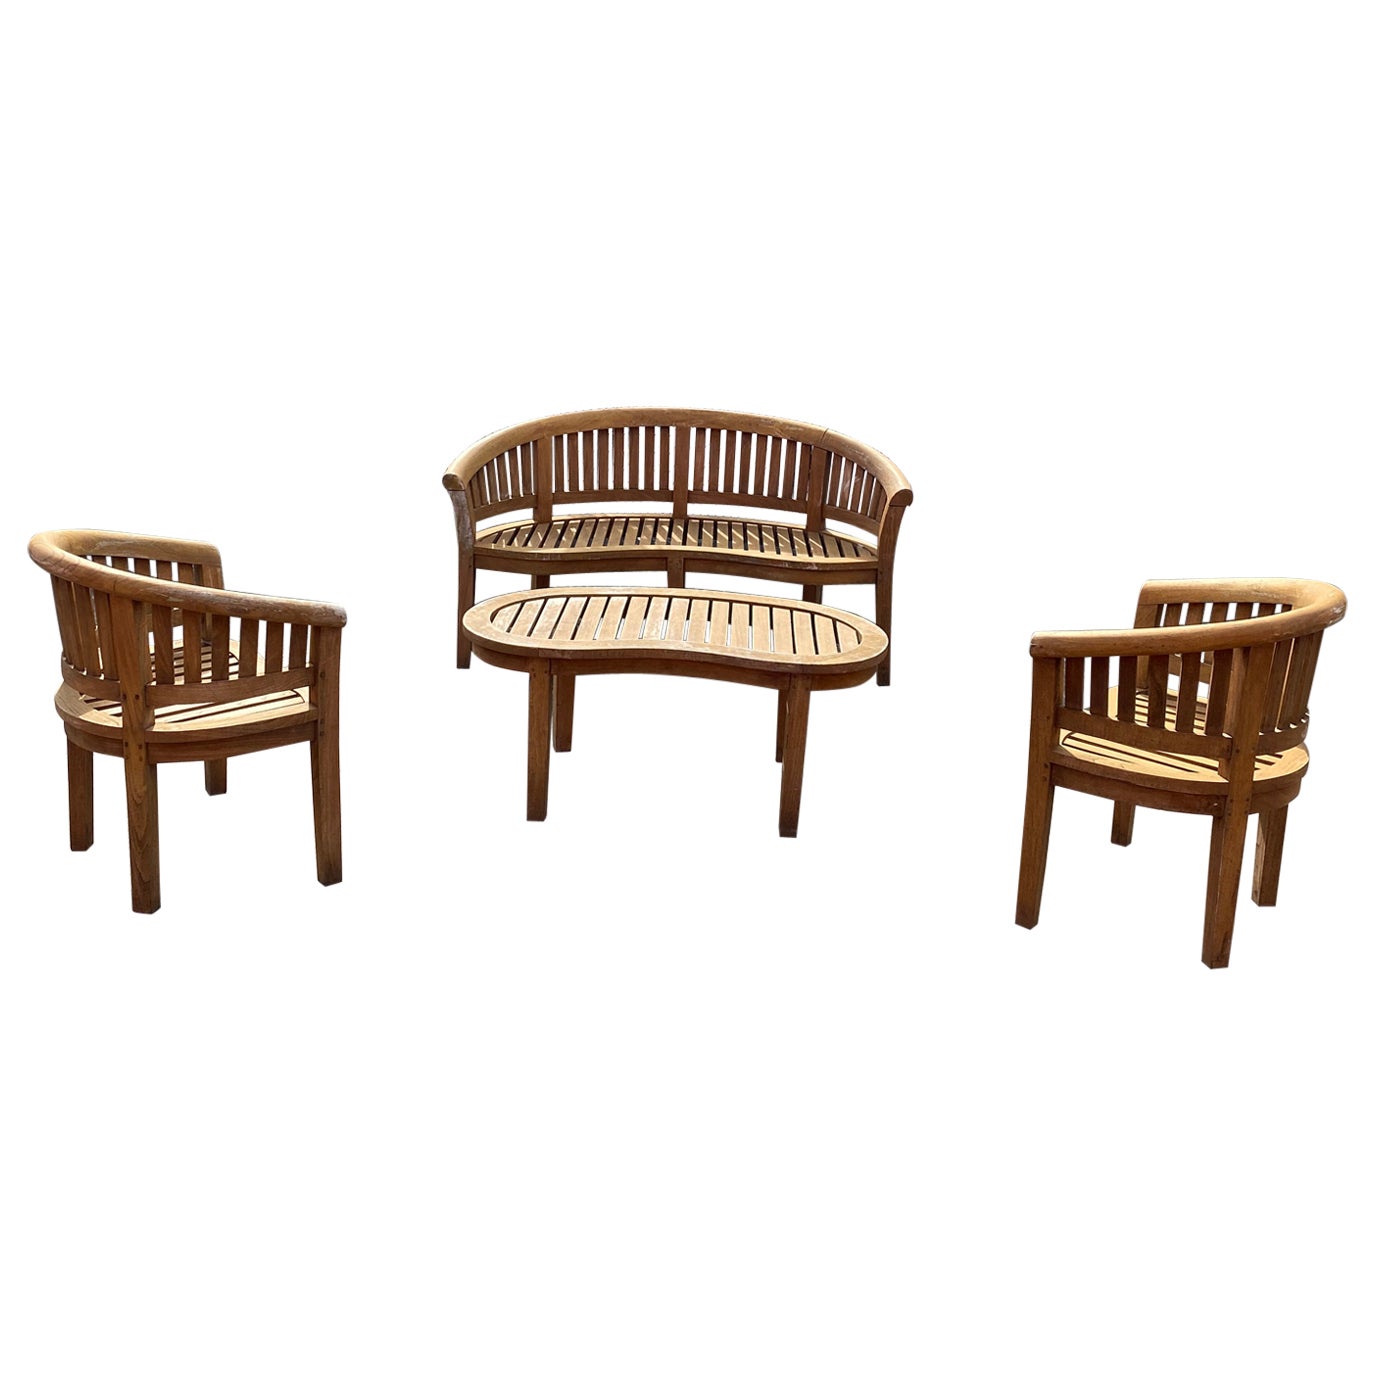 1970s Teak Curved Barrel Kidney Slatted Settee Table Chairs, Set of 4